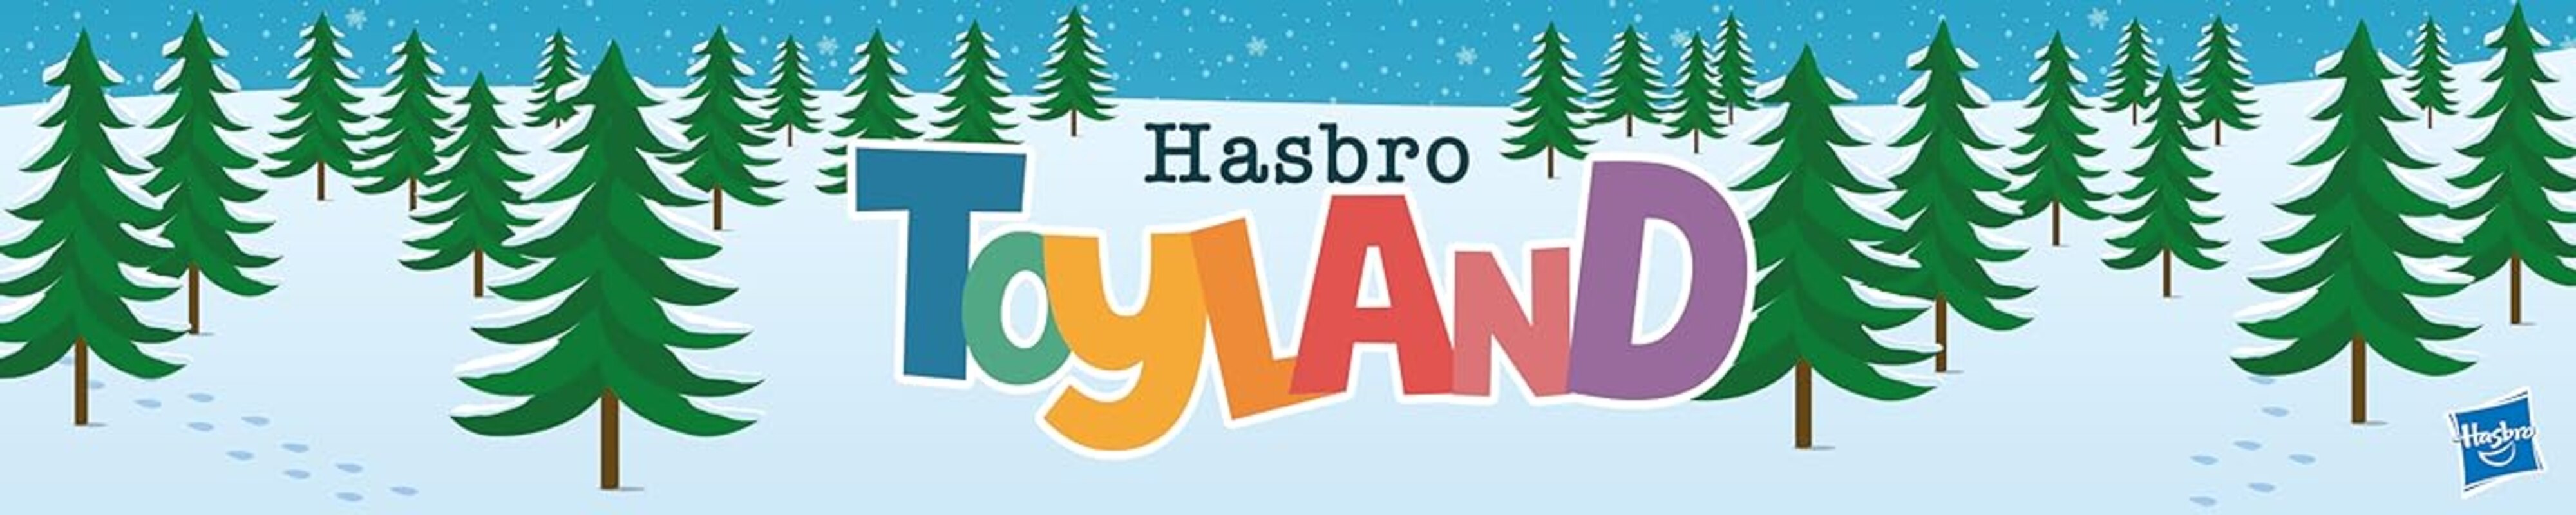 Hasbro and Amazon Announce TOYLAND with FREE Family Holiday Pop-Up Event in NYC